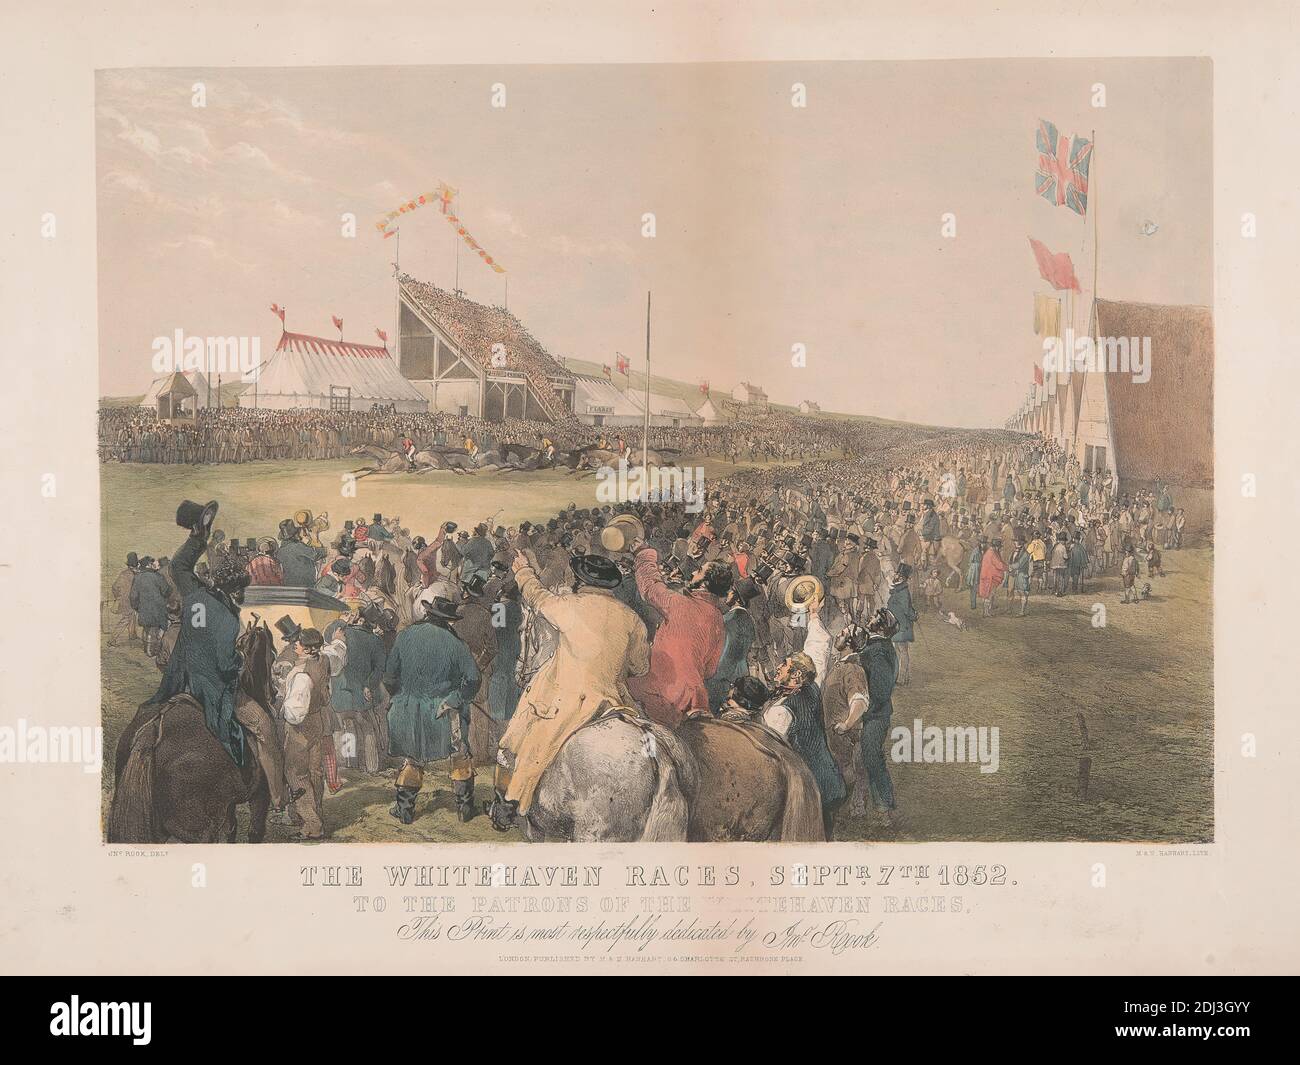 The Whitehaven Races, Septr. 7th, 1852 / To the Patrons of the Whitehaven Races / This Print is most respectively dedicated by Jno. Rook, Michael Hanhart, active 1841–1852, And N. Hanhart, active 1841–1852, after John Rook, active 1852, 1852, Hand colored lithograph, Sheet: 10 3/4 x 14 3/4in. (27.3 x 37.5cm Stock Photo